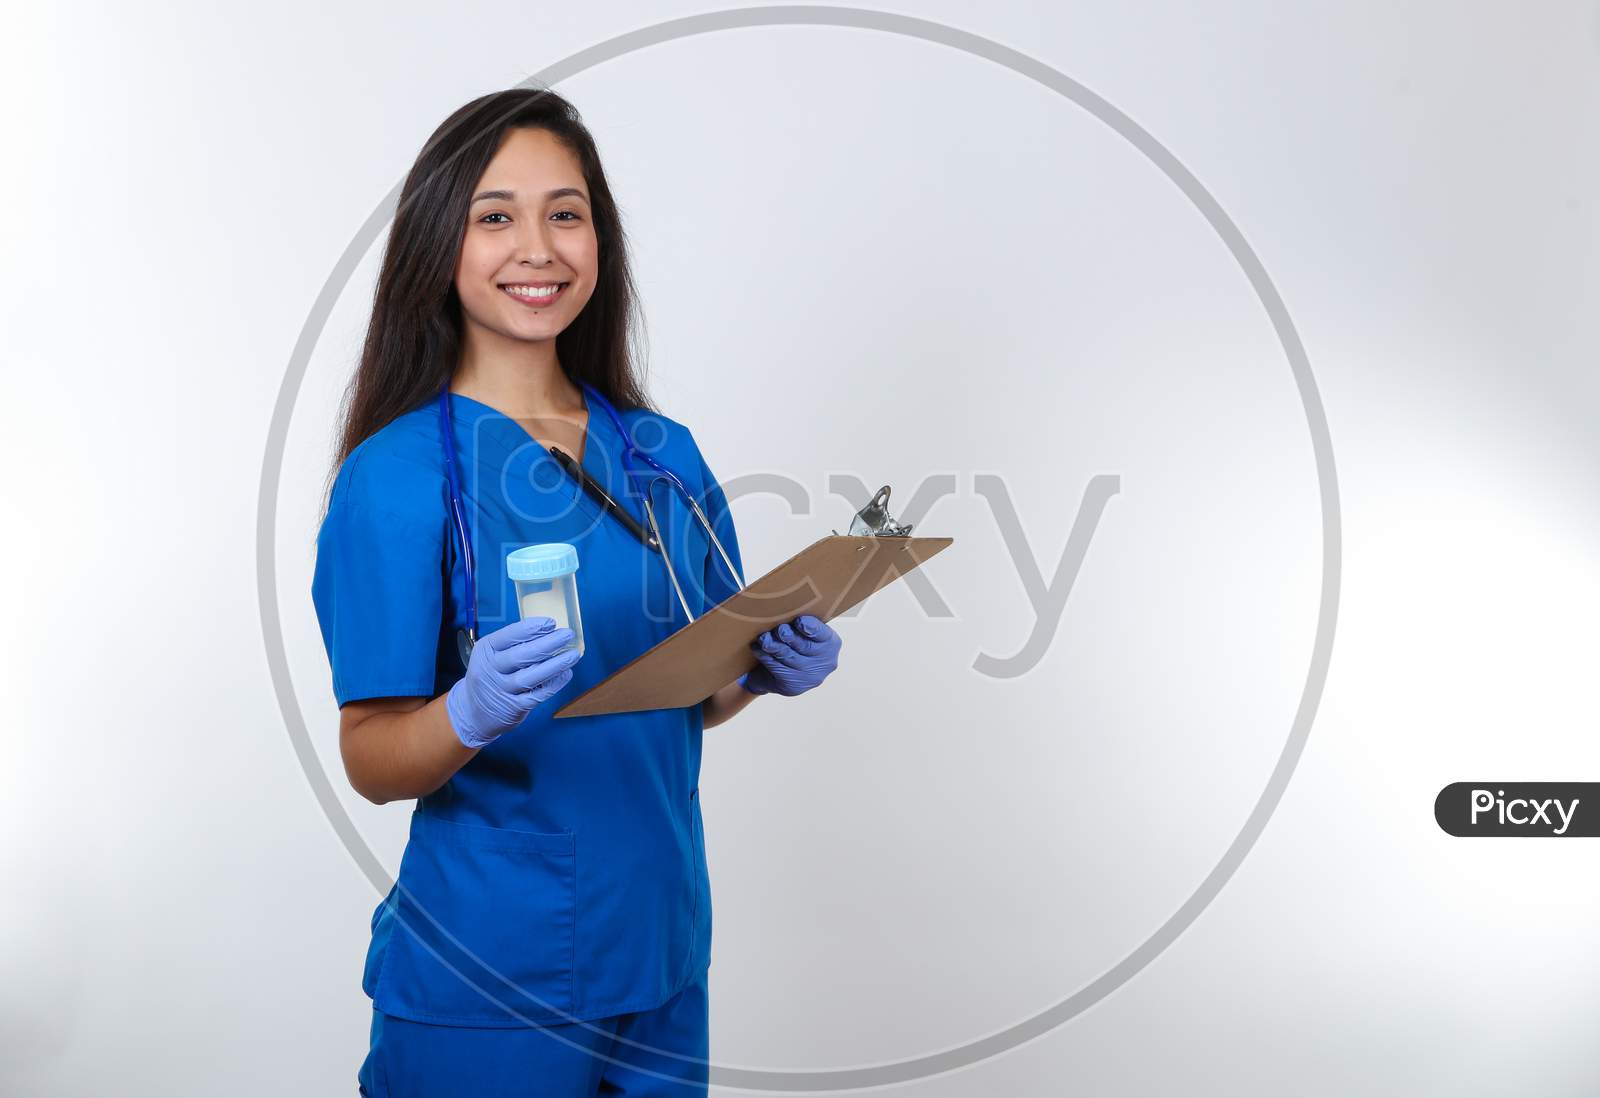 A Cheerful Nurse Holding An Empty Urine Sample Collector Cup For A Drug Test.